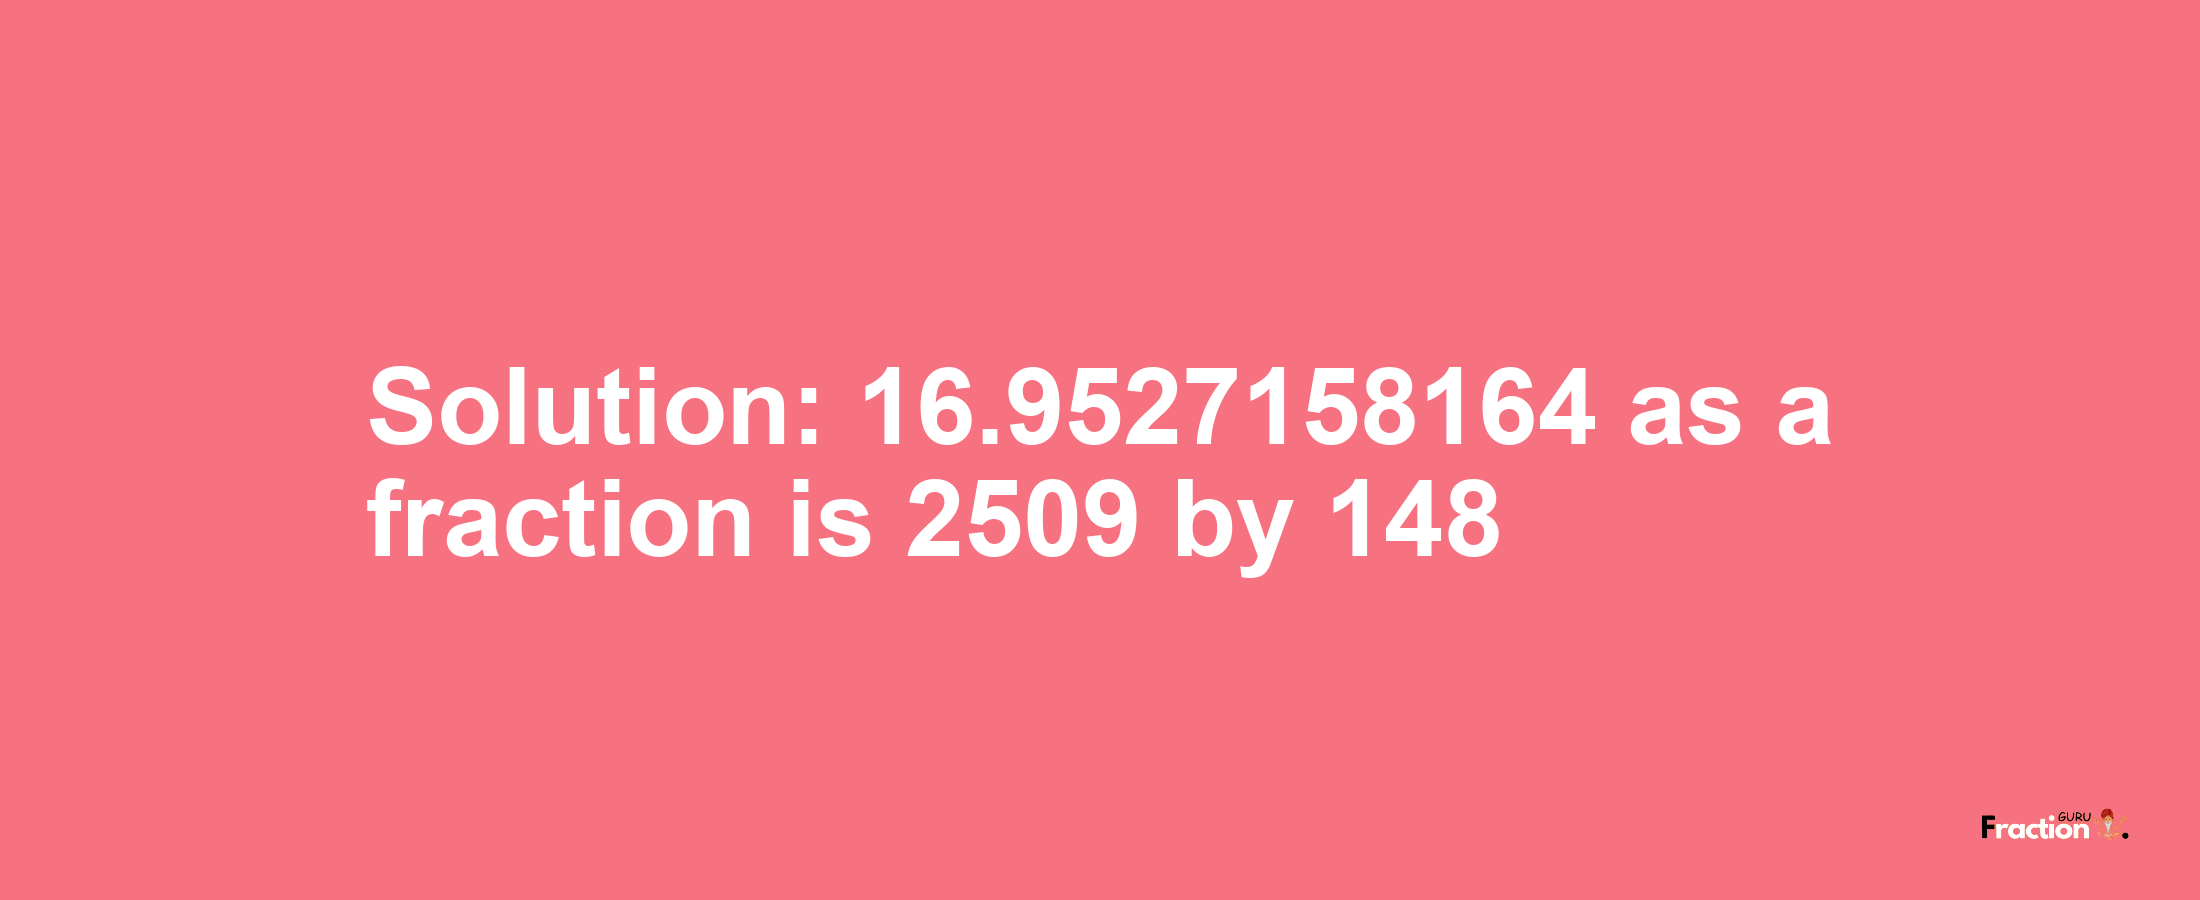 Solution:16.9527158164 as a fraction is 2509/148